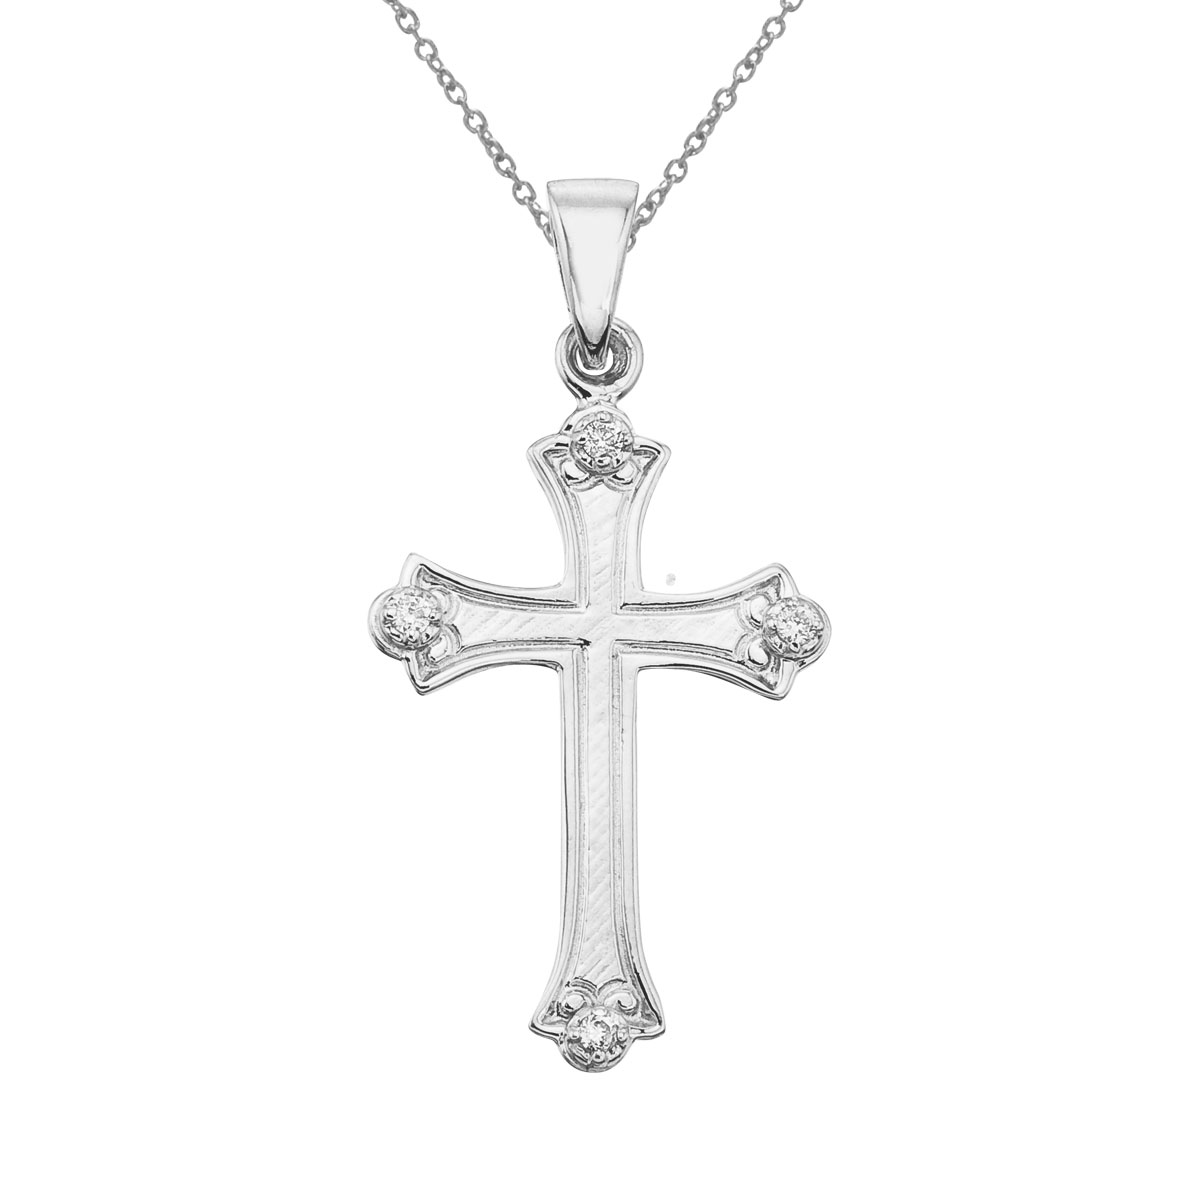 JCX2958: 14k white gold cross. A great gift for all ages.